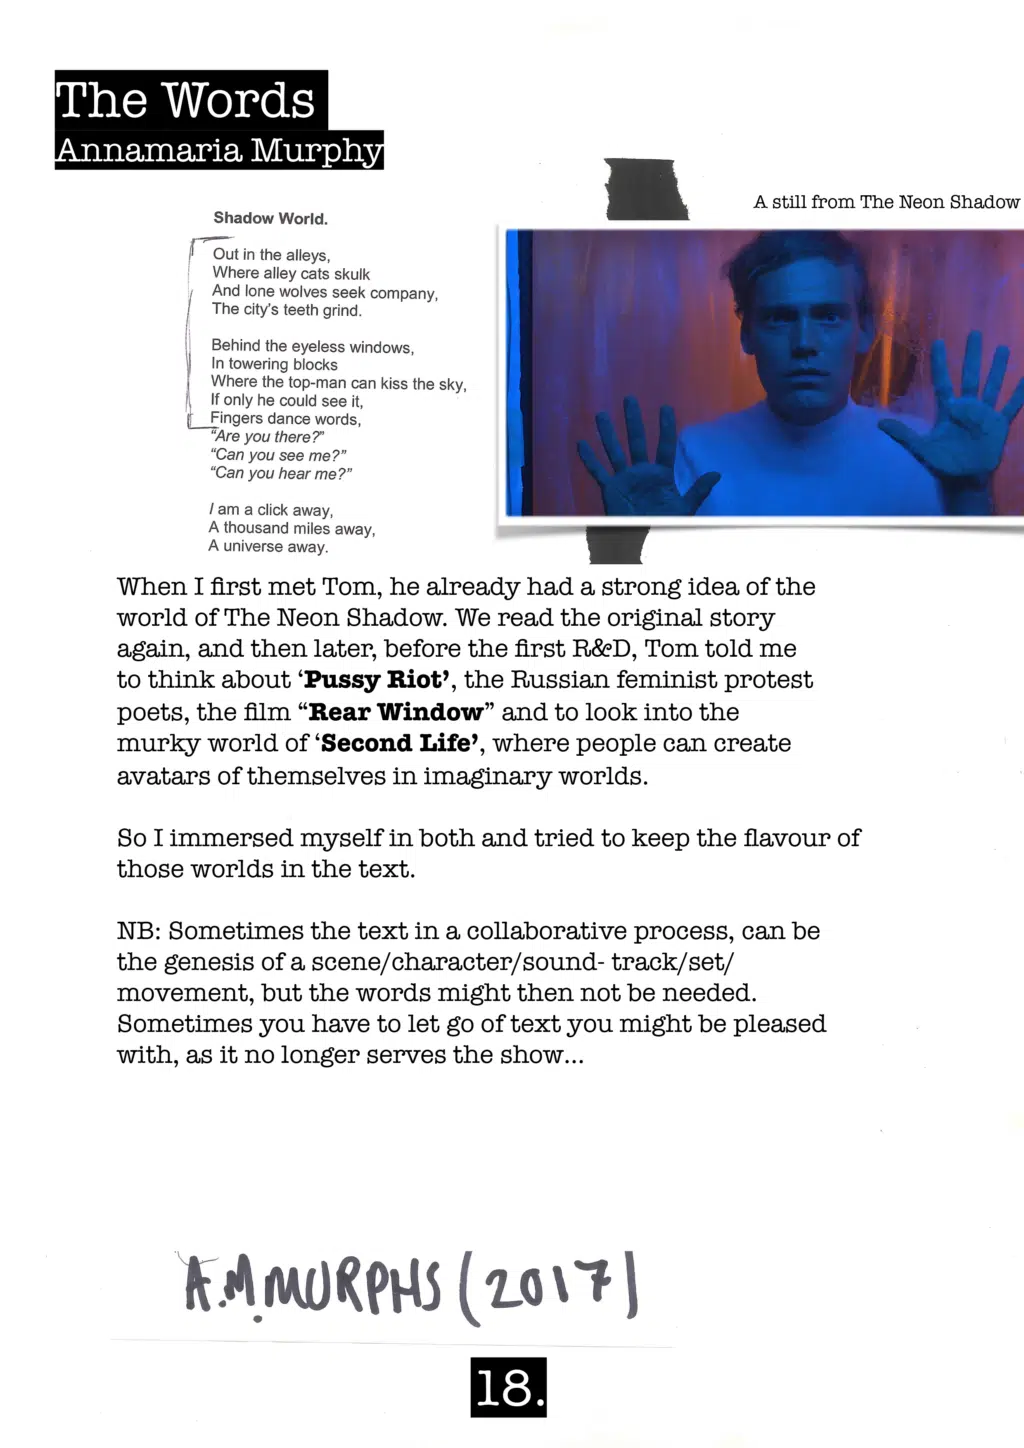 Shadow kit exercise, The Words page. Text box of written text with photo still of a headshot from The Neon Shadow.